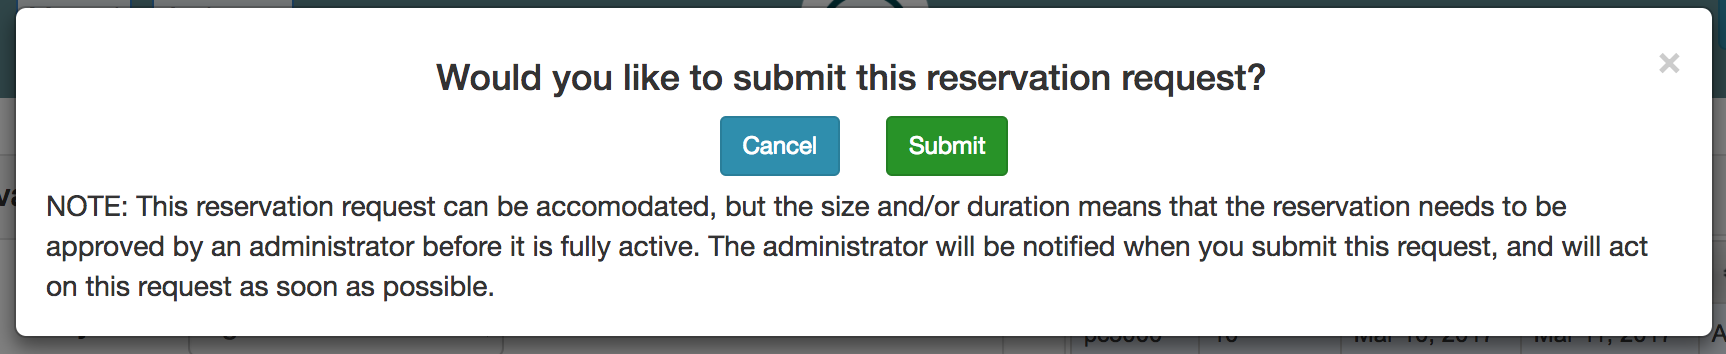 screenshots/elab/reservation-submit.png